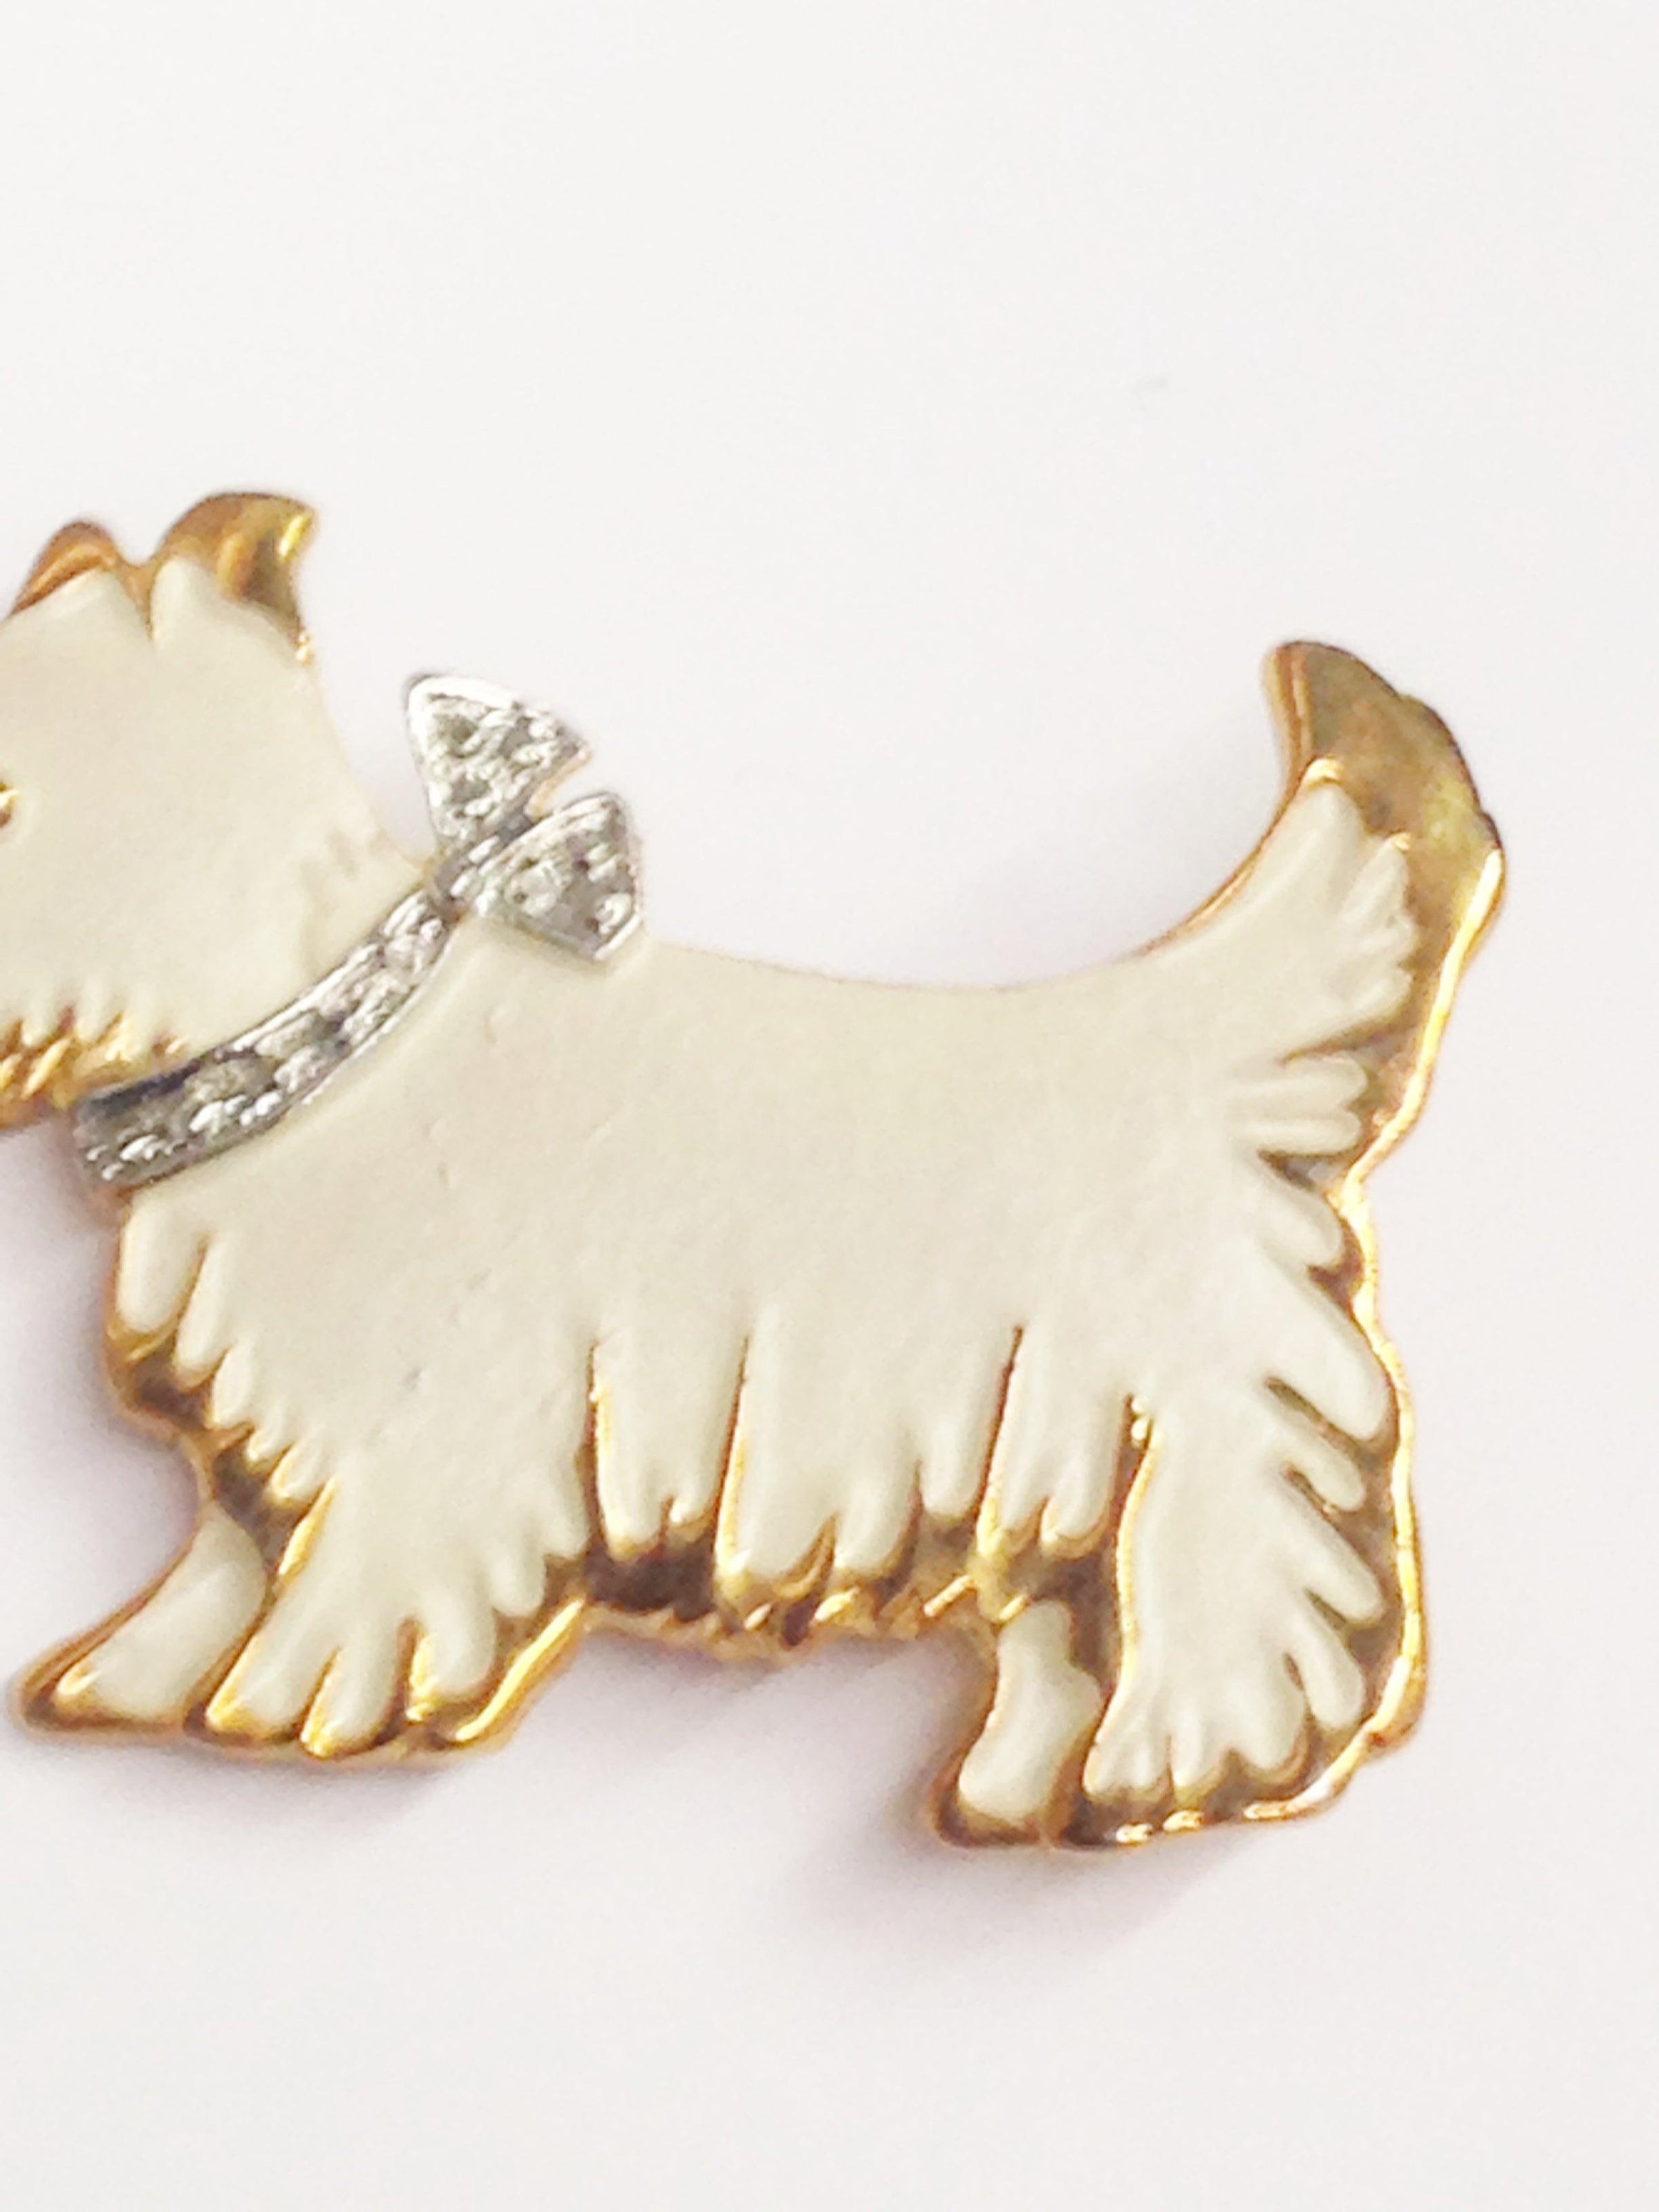 Scottish Terrier Dog Brooch Pin W/ Gold Trim - Hers and His Treasures